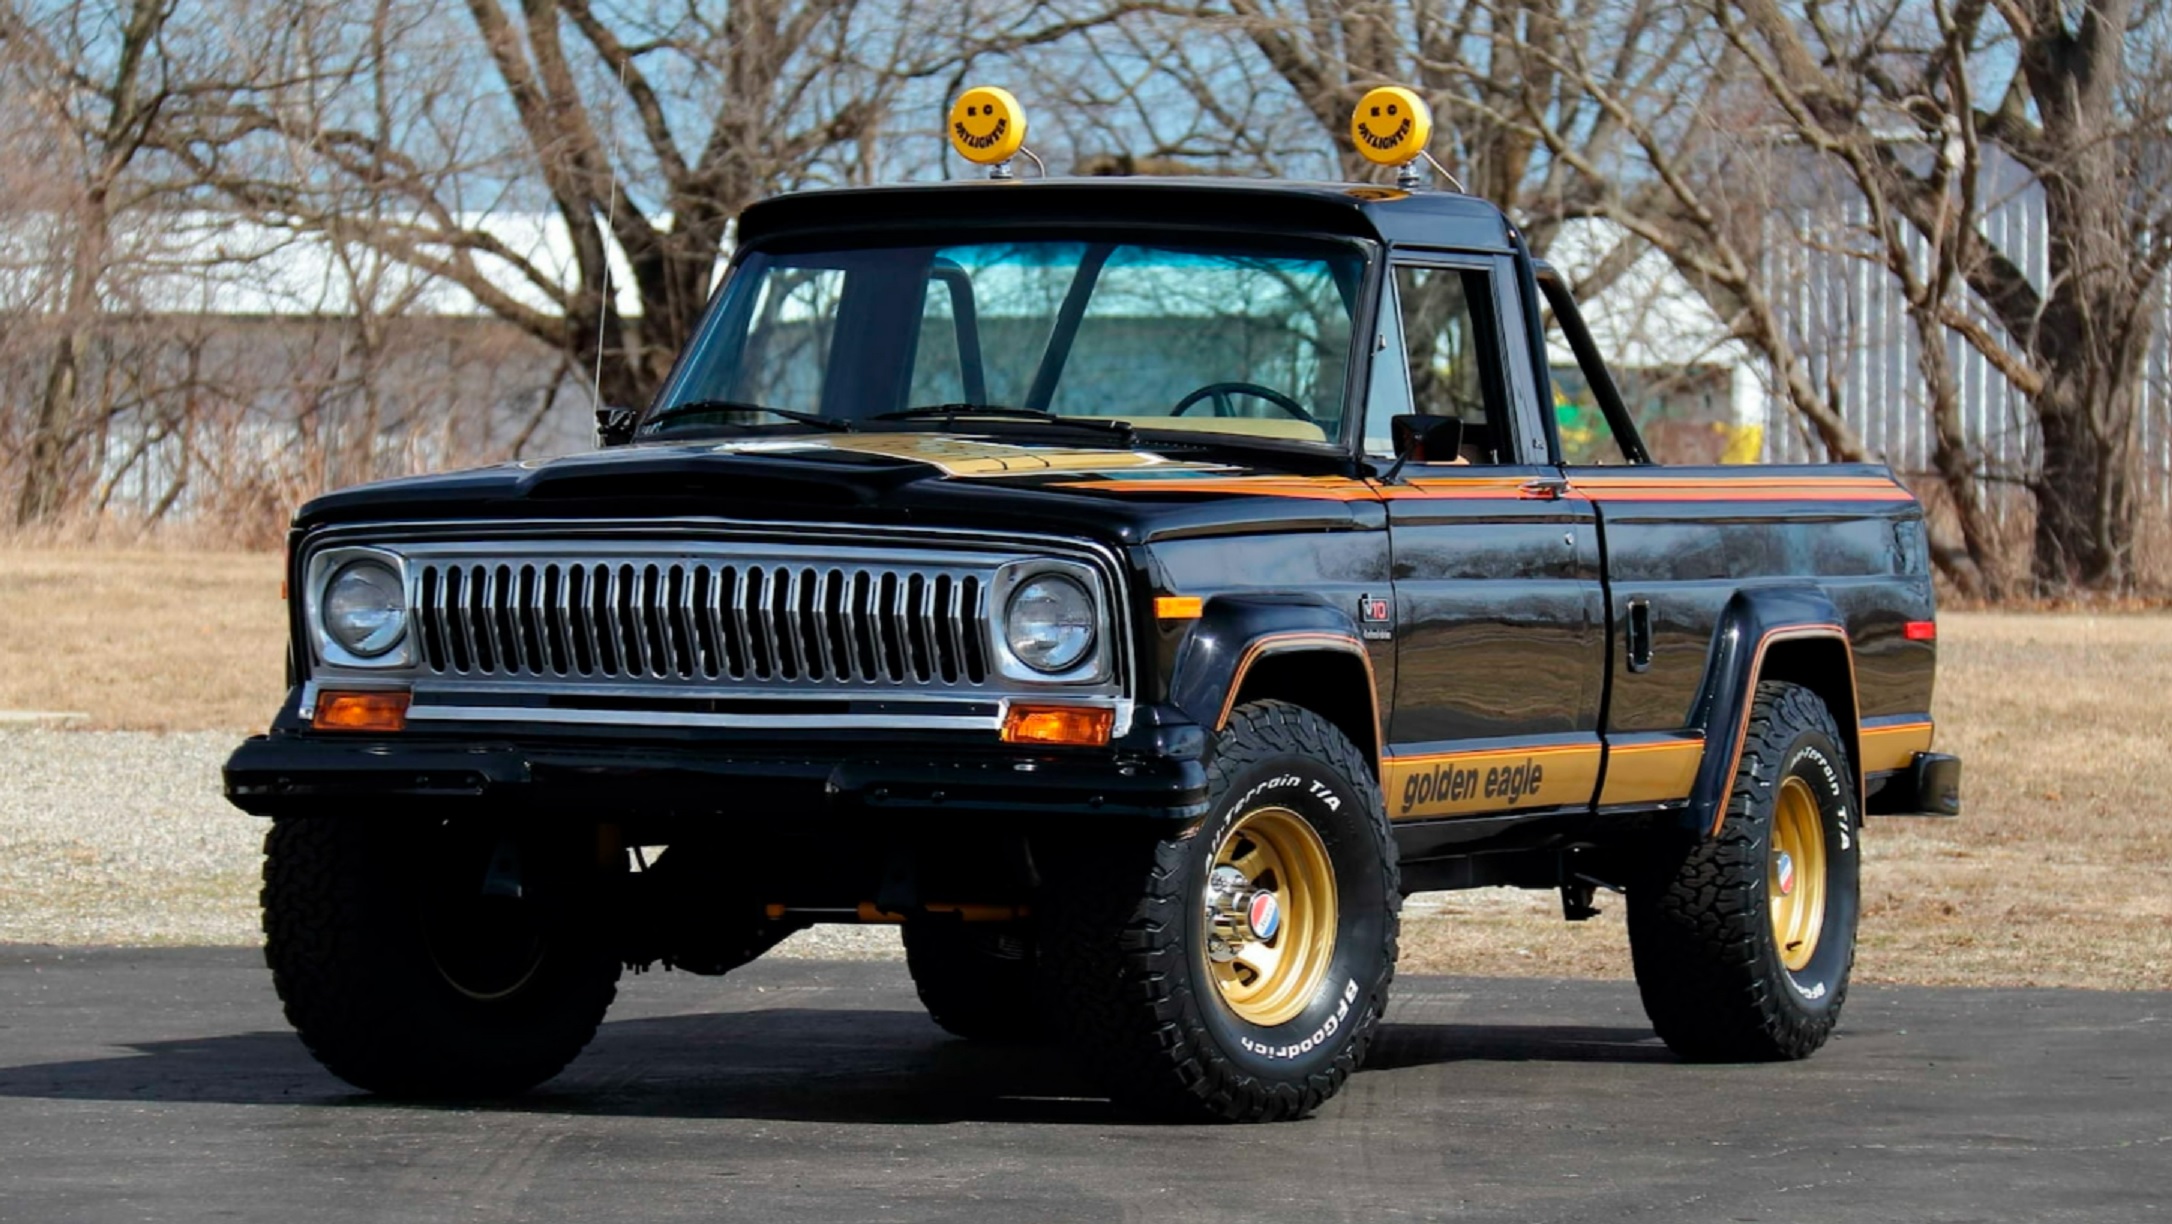 A black-and-gold modified 1978 Jeep J10 Golden Eagle in a parking lot